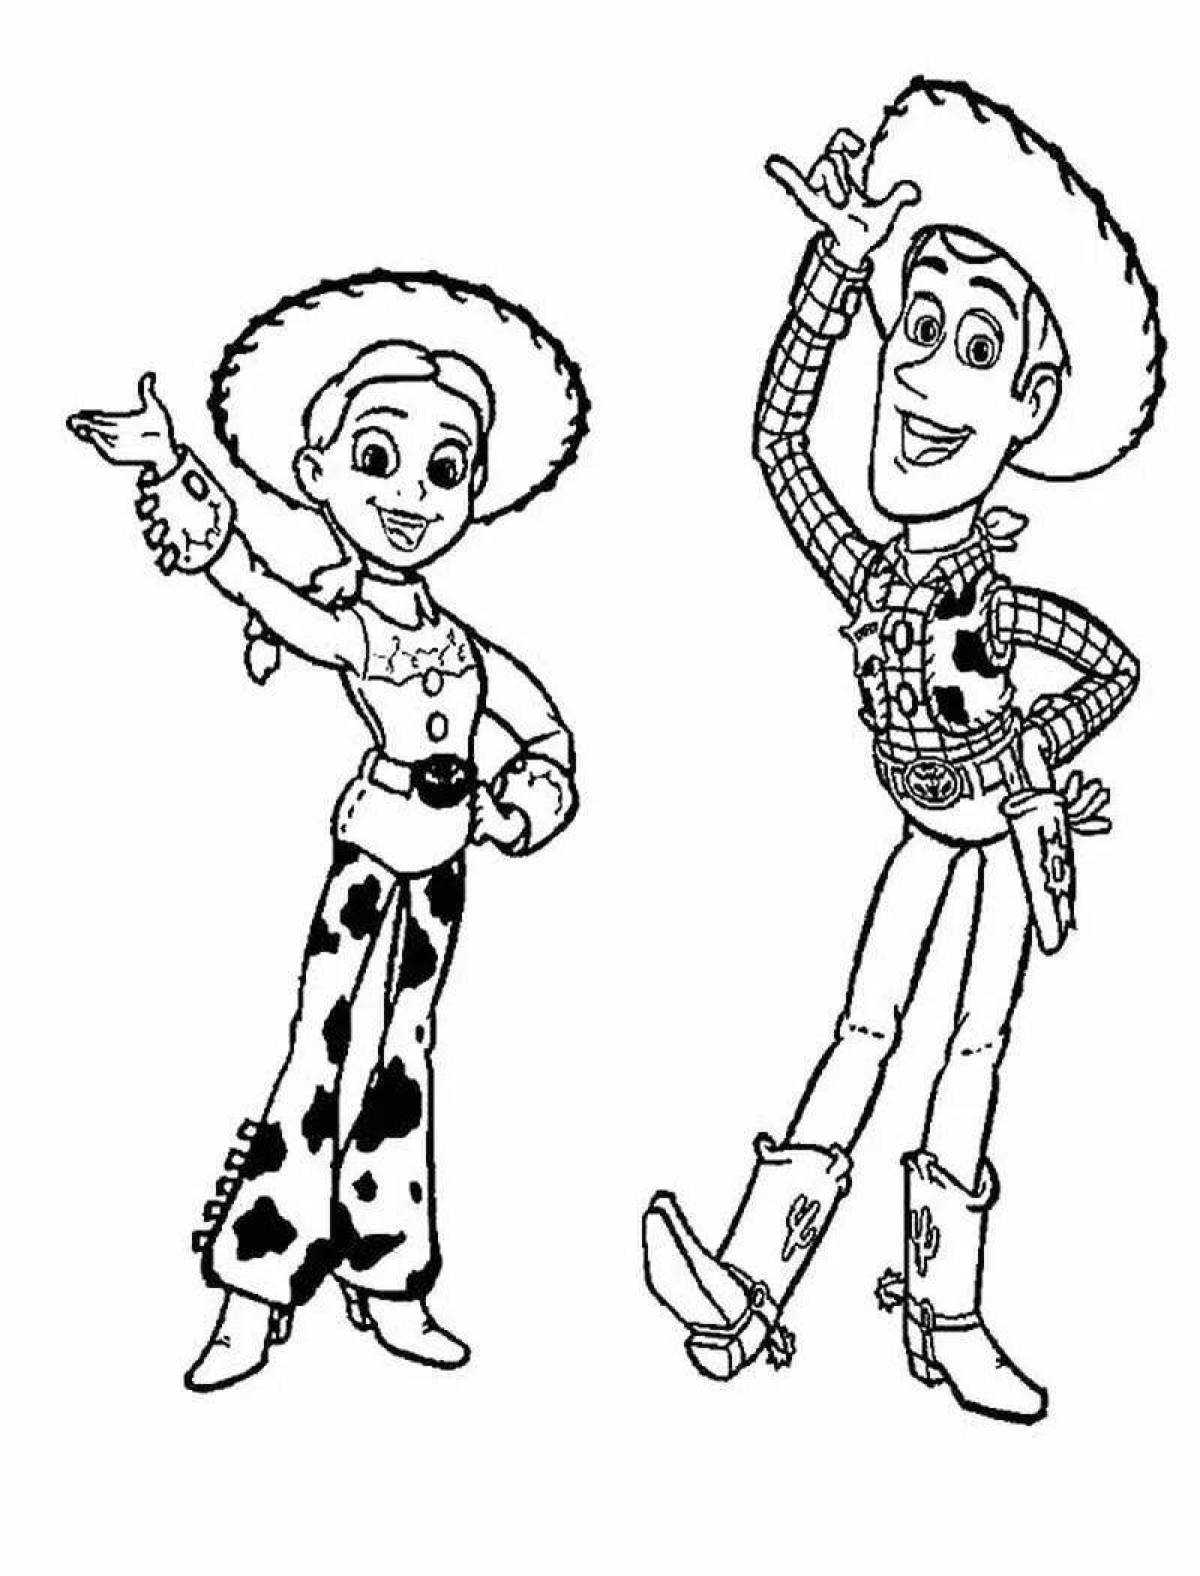 Jessie's living toy story coloring book